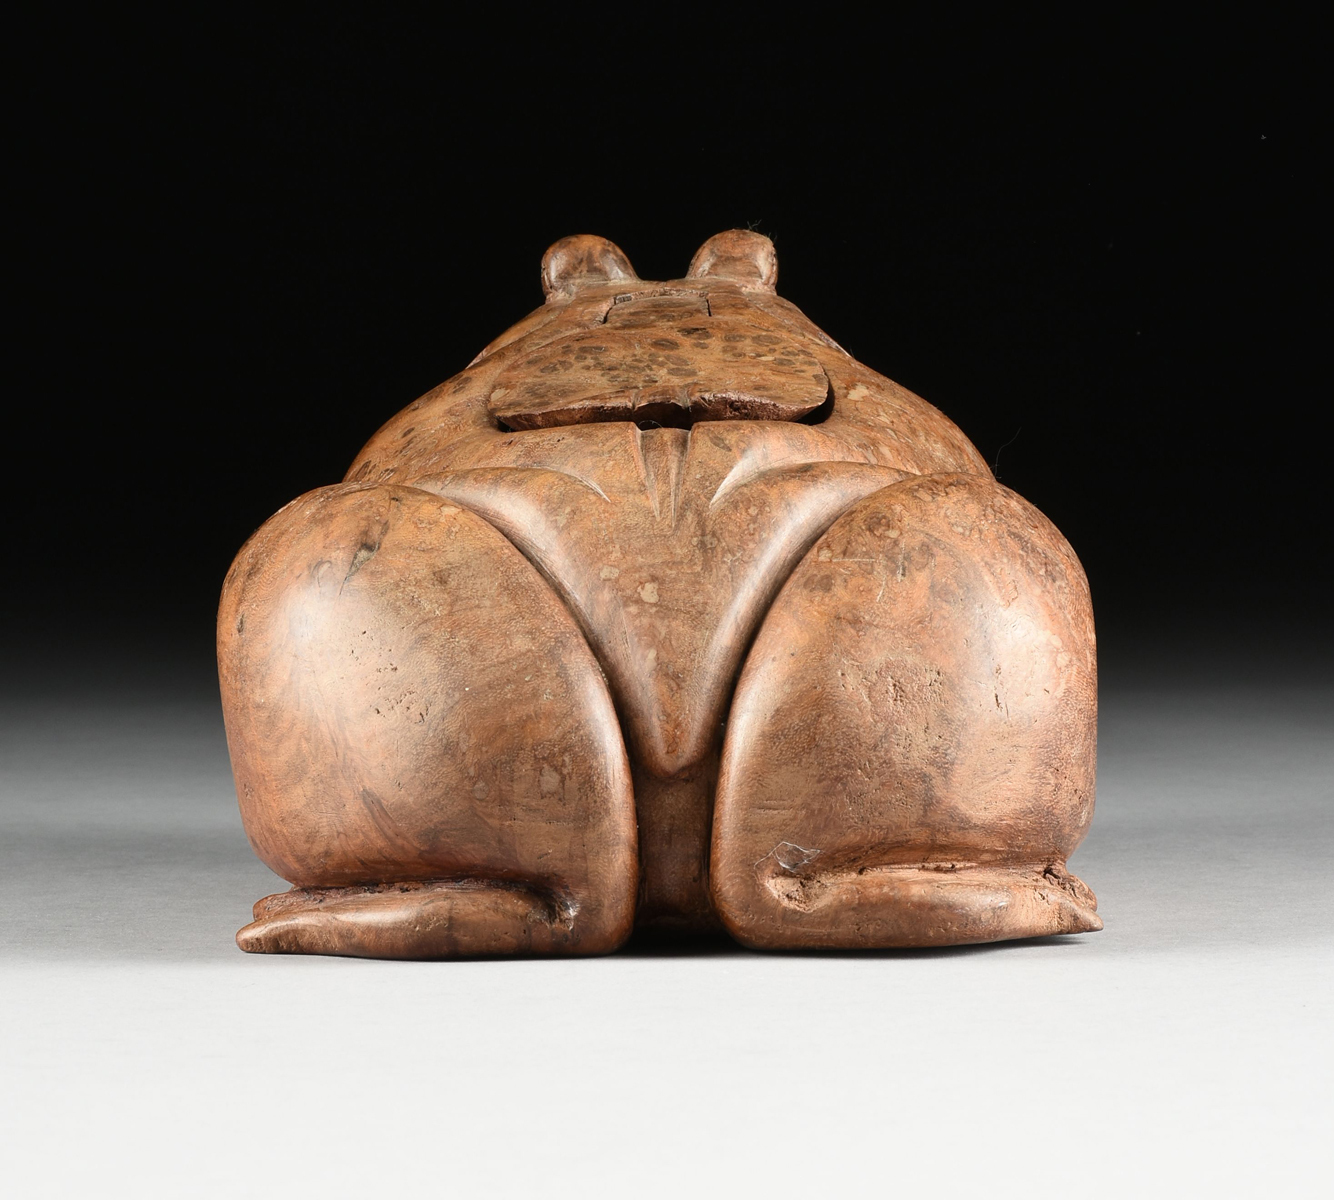 A SOUTH EAST ASIAN CARVED BURL WOOD FROG FORM BOX, POSSIBLY INDONESIAN/VIETNAMESE, 20TH CENTURY, - Image 8 of 10